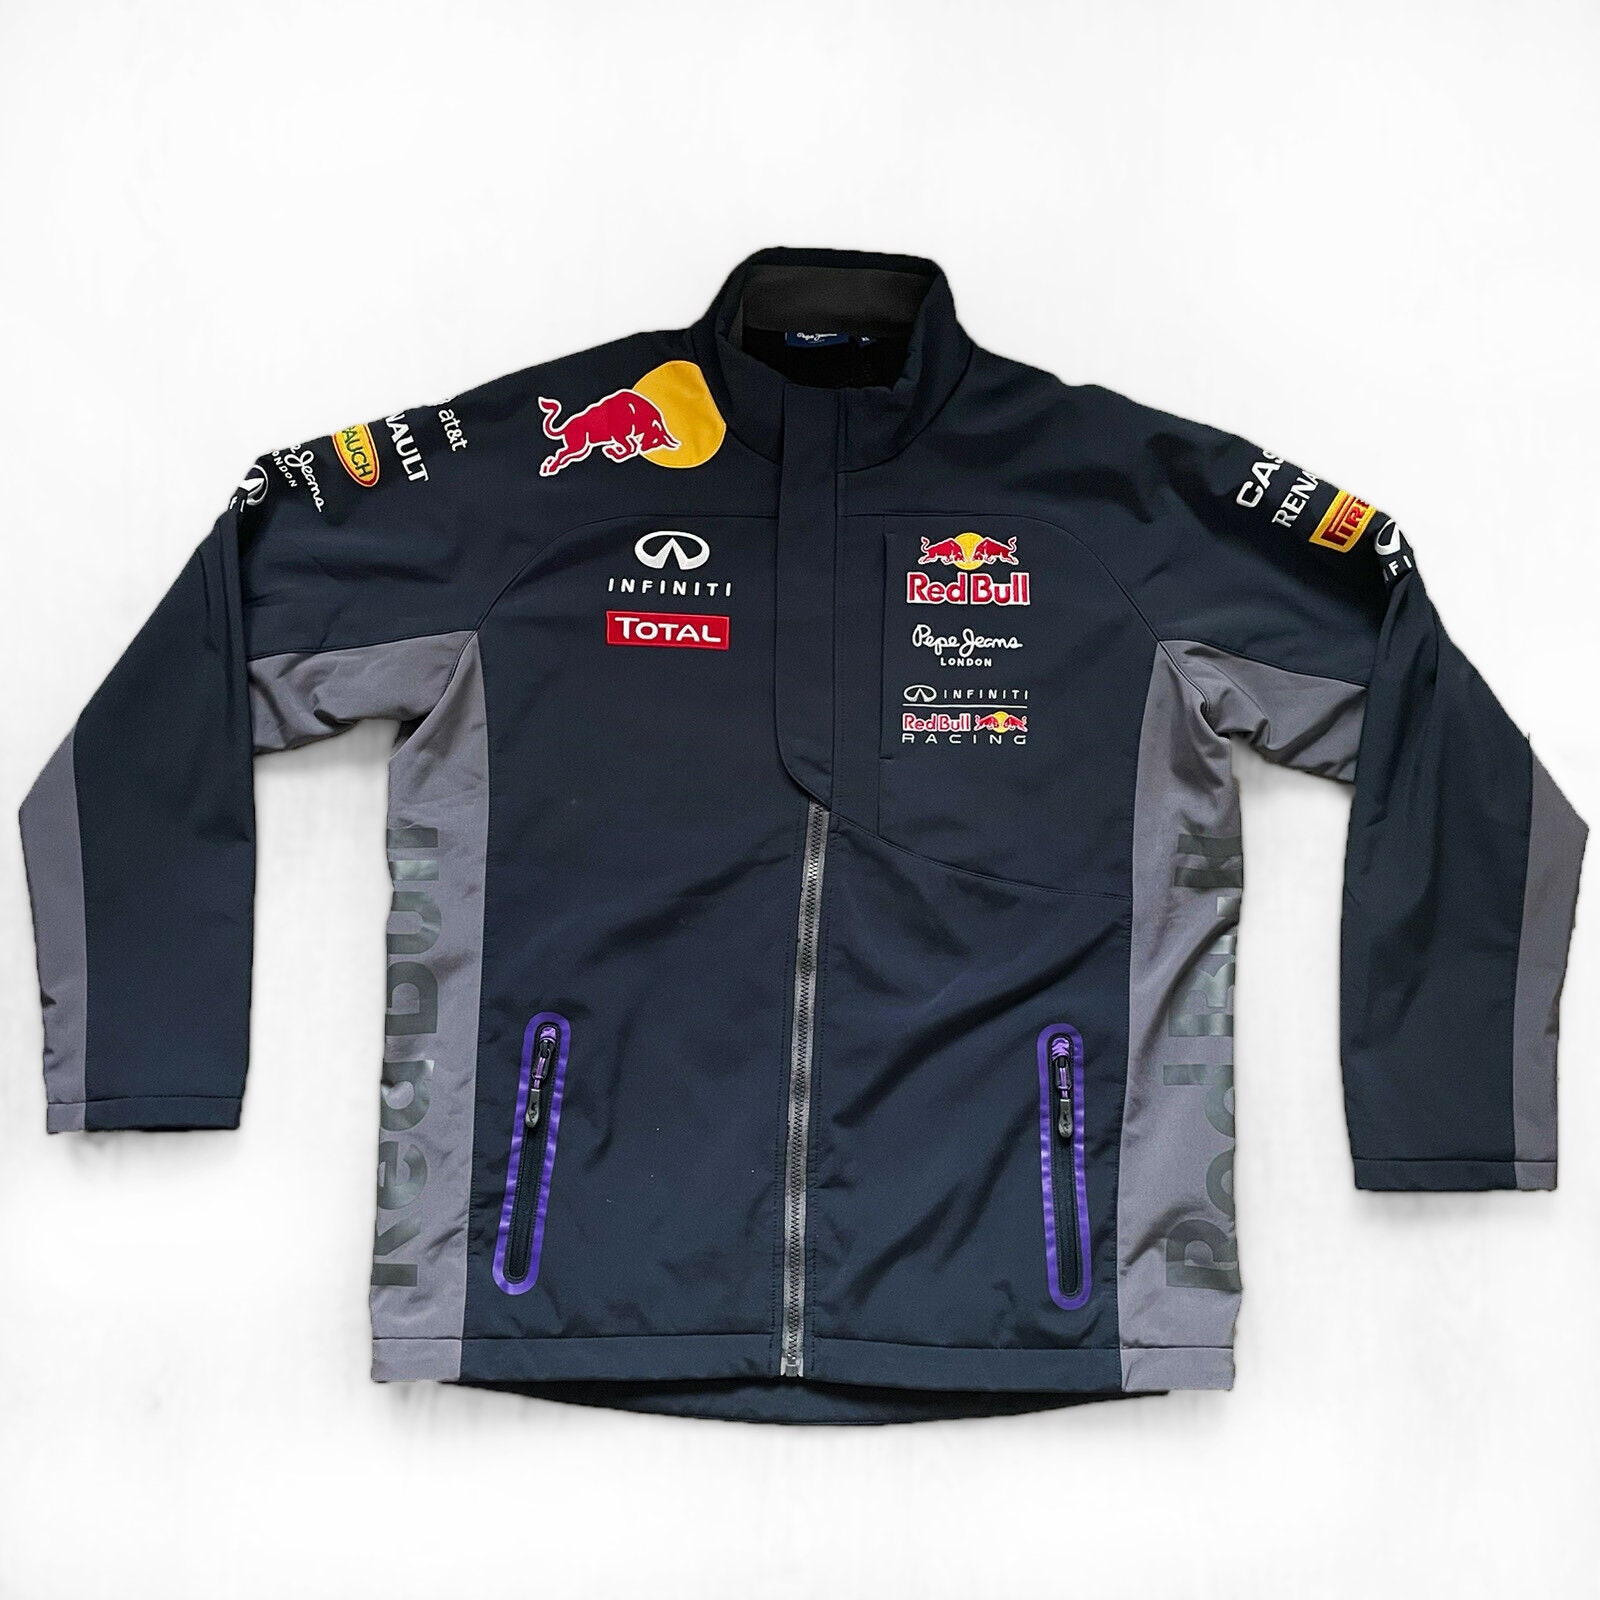 Red Bull Racing Pepe Jeans Total Infiniti Official Softshell - Etsy Ireland